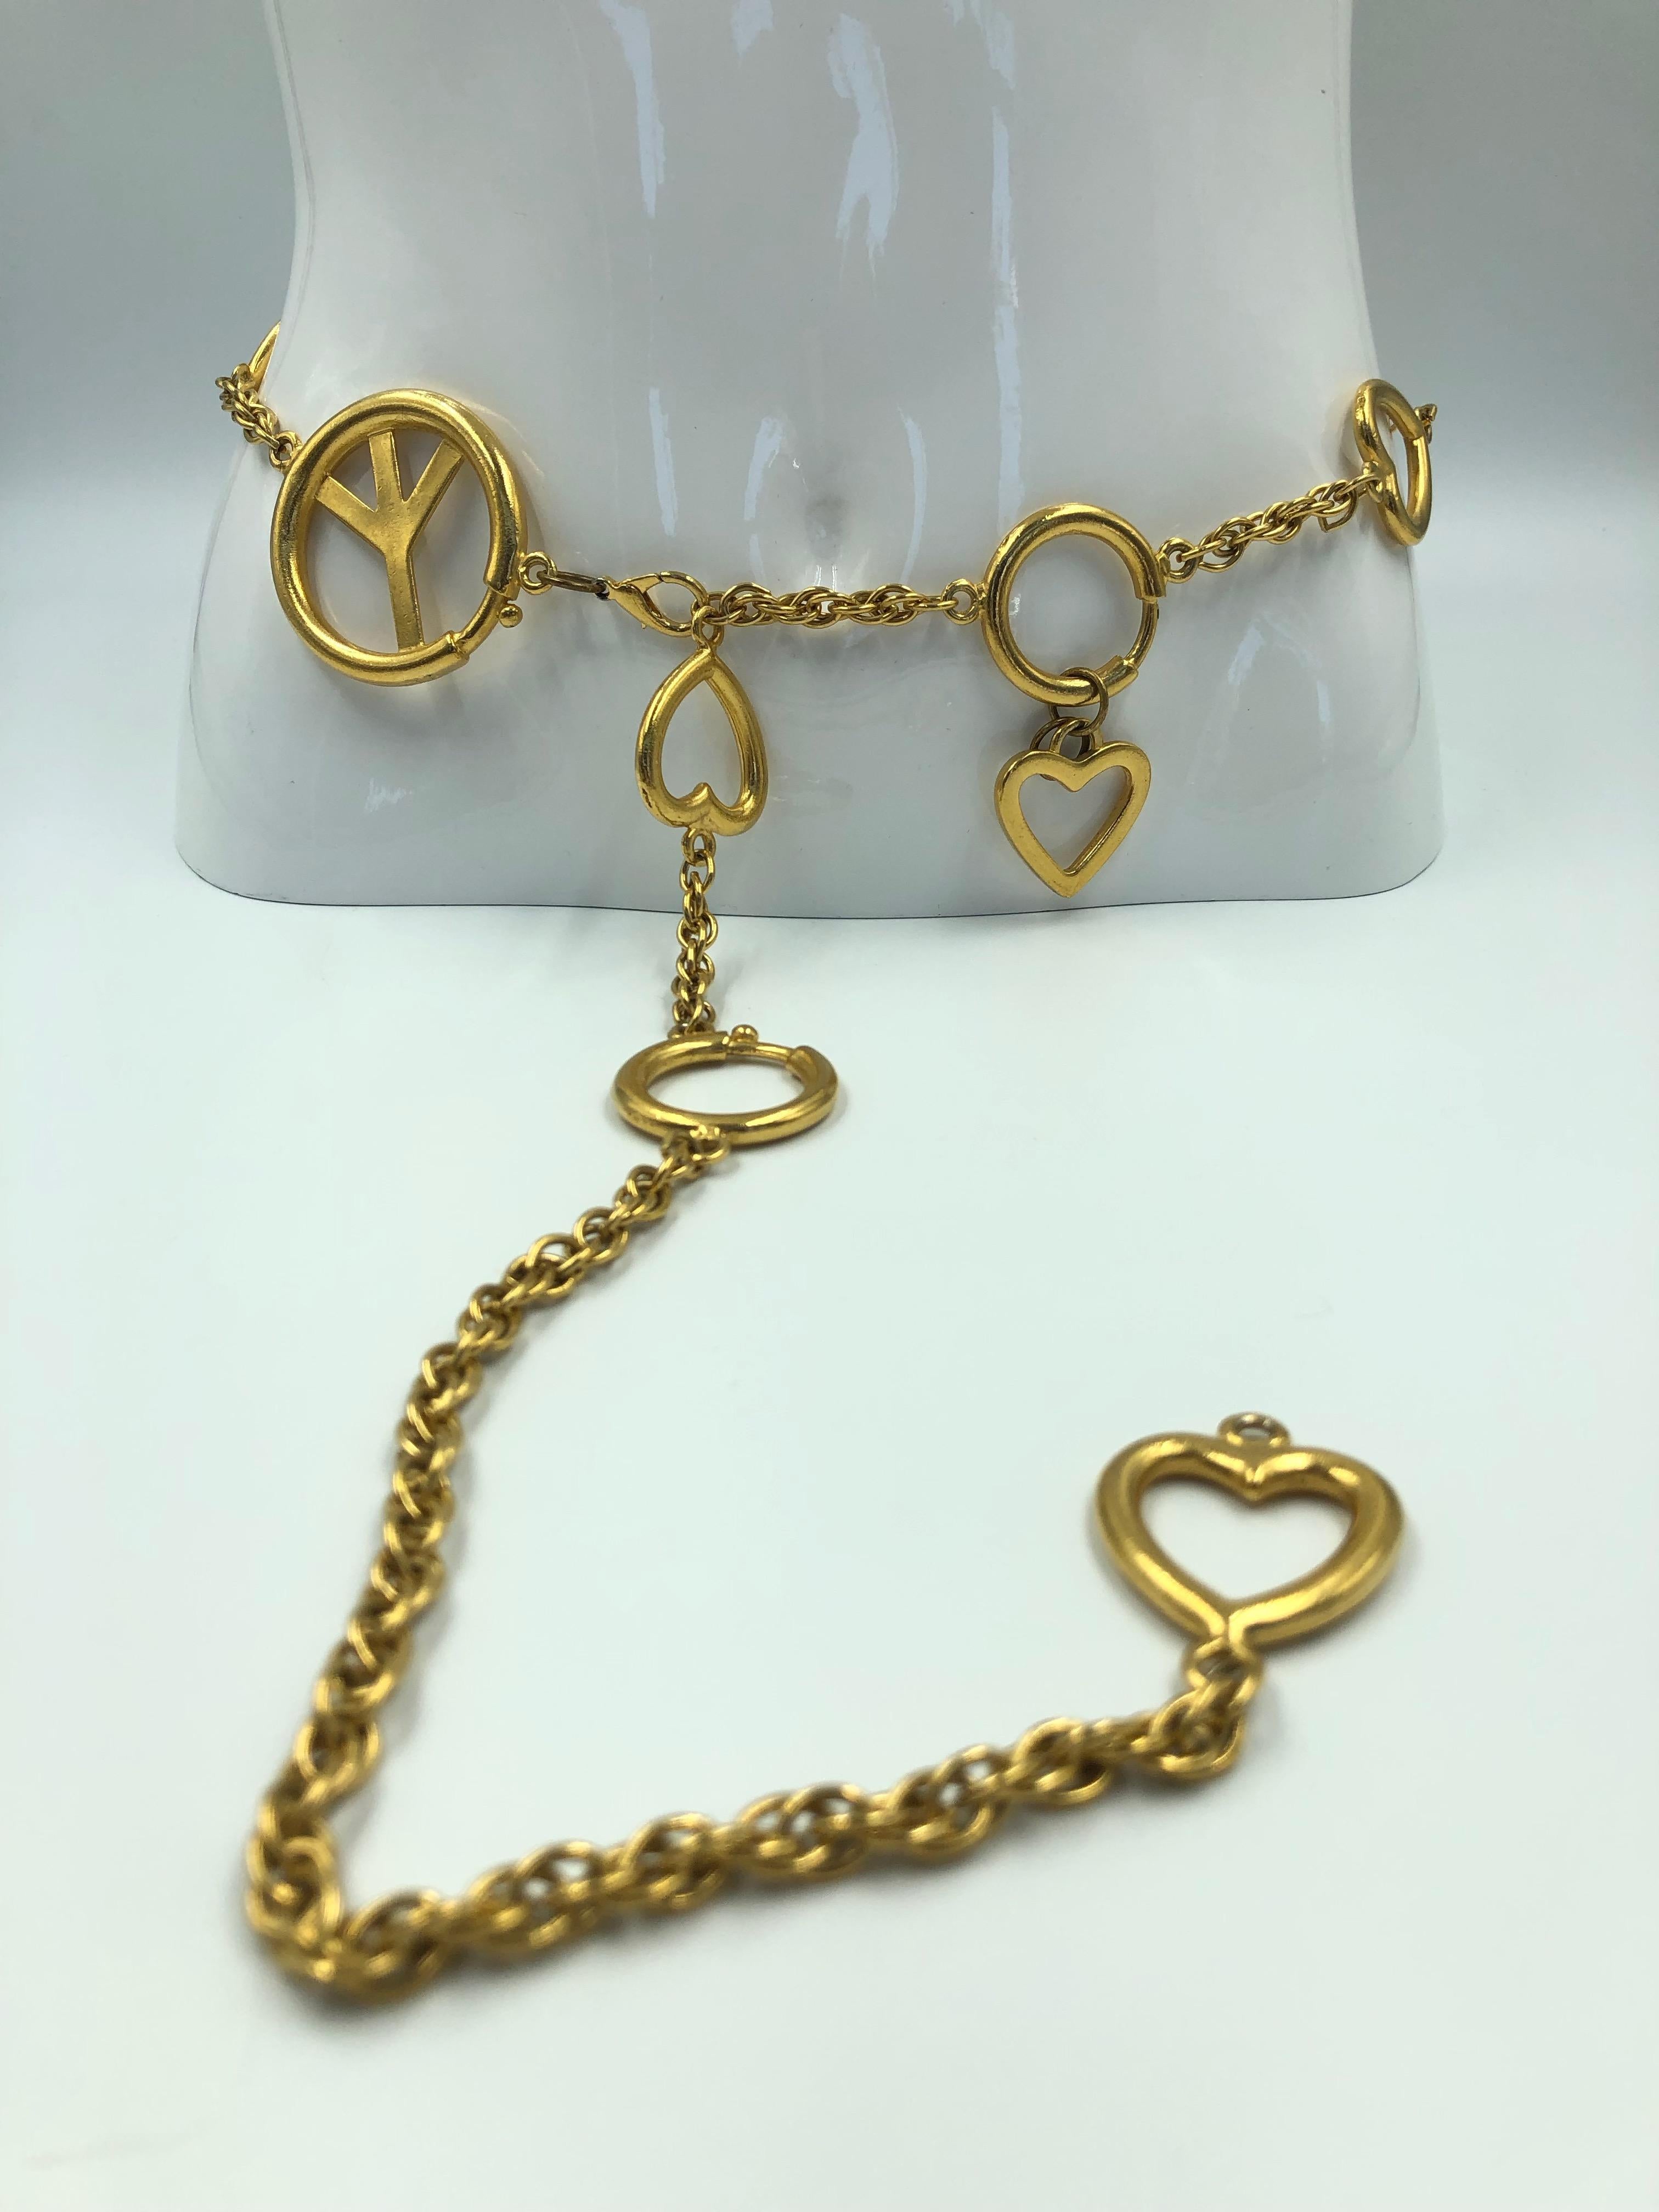 Moschino Peace Sign Gold Tone Metal Chain Belt

*MEASUREMENTS TAKEN FLAT*
Total Length: 44